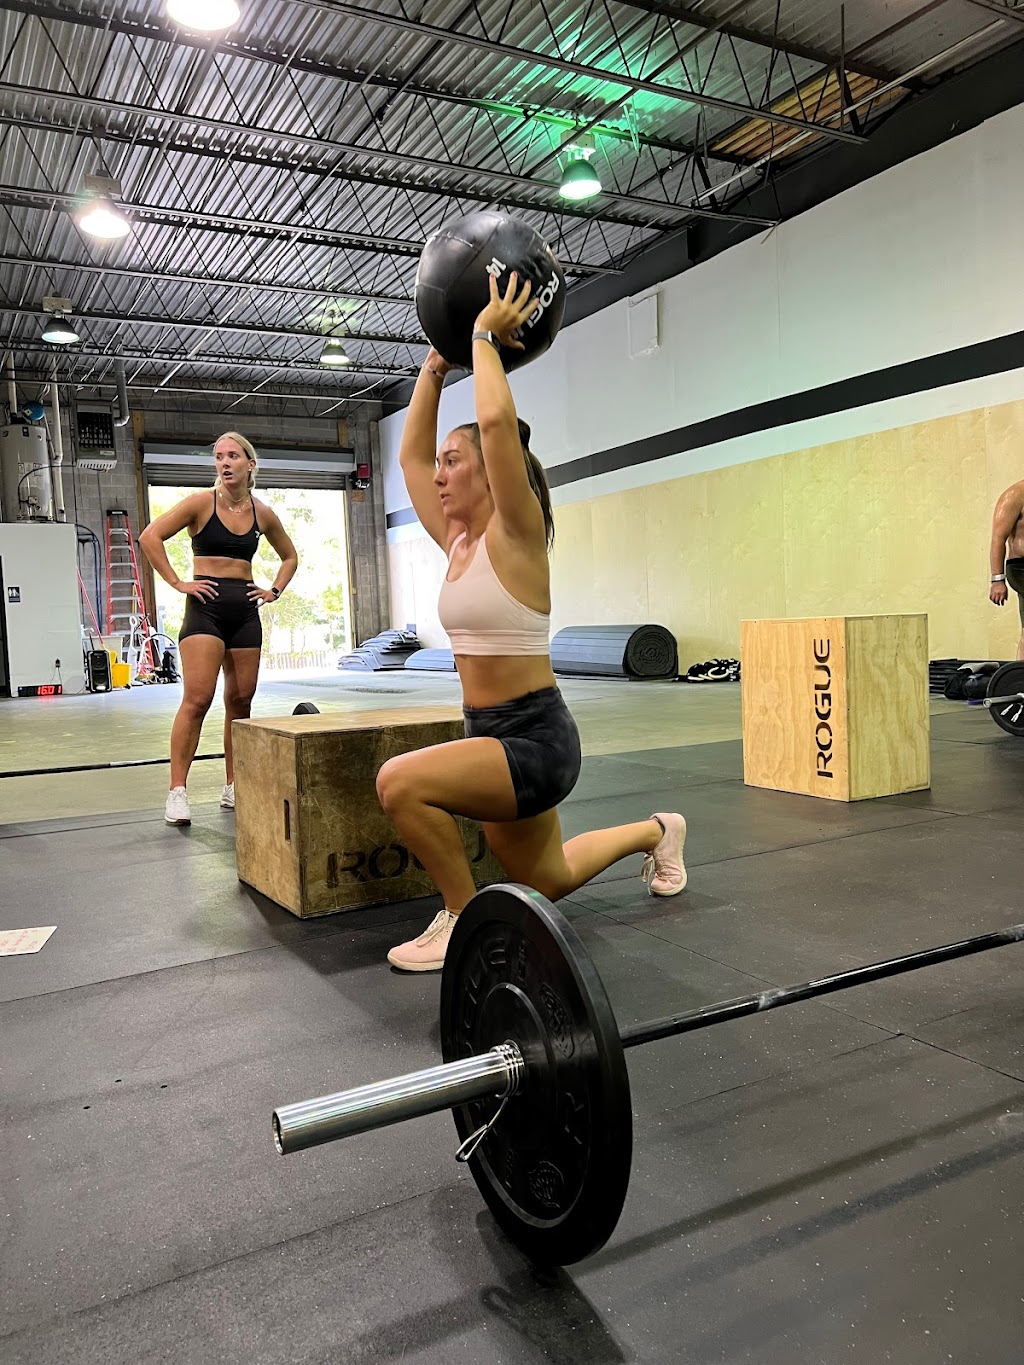 CrossFit Lansdale | Located behind the building, 668 Bethlehem Pike Unit 2B, Montgomeryville, PA 18936 | Phone: (267) 416-8399